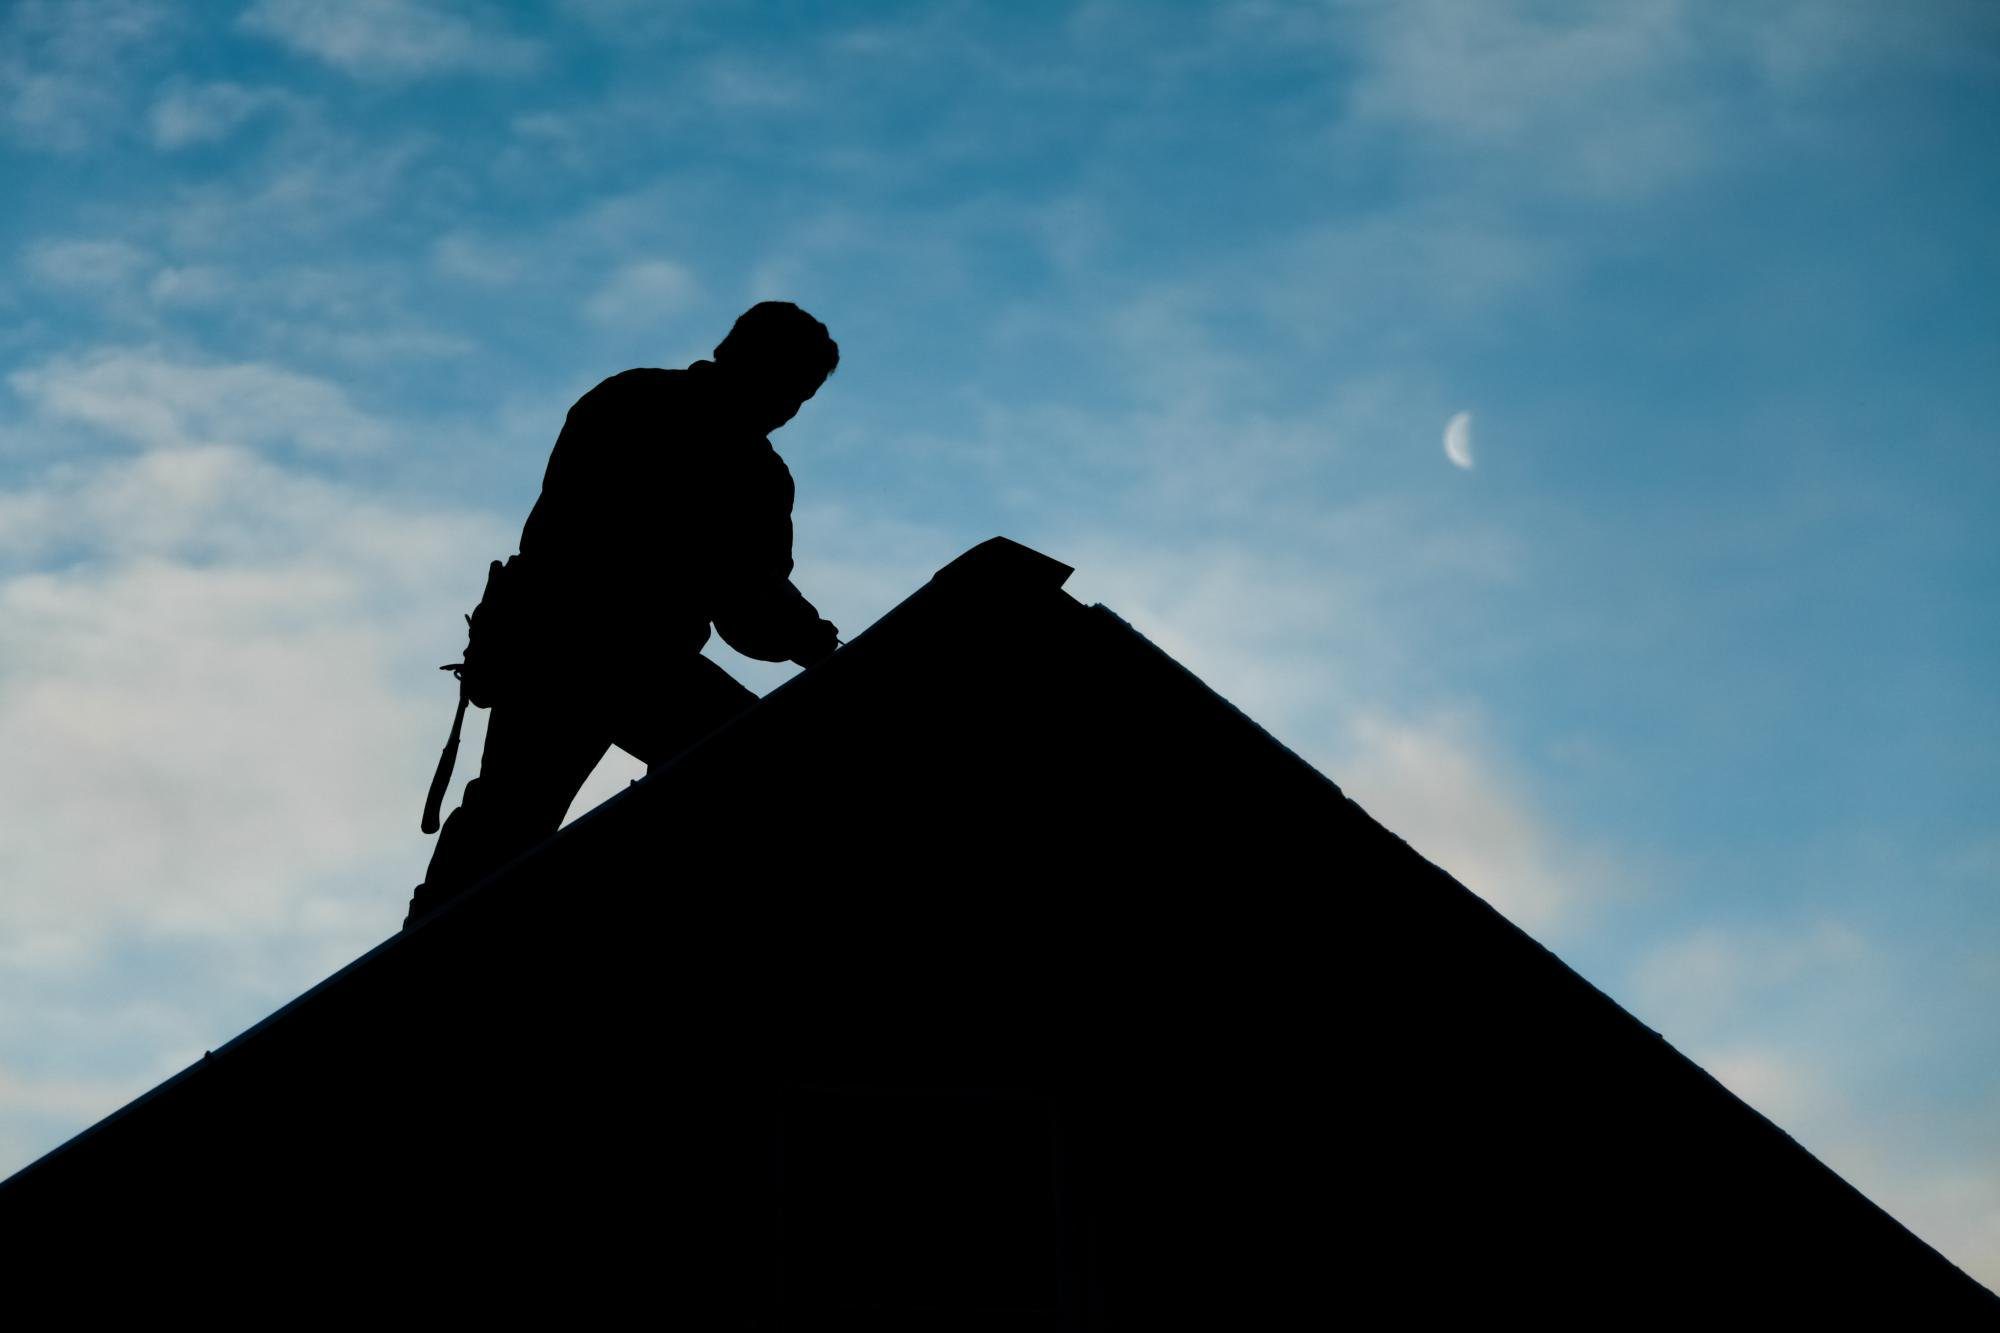 silhouette of a man walking on the roof while performing repairs - is it safe to walk on your roof